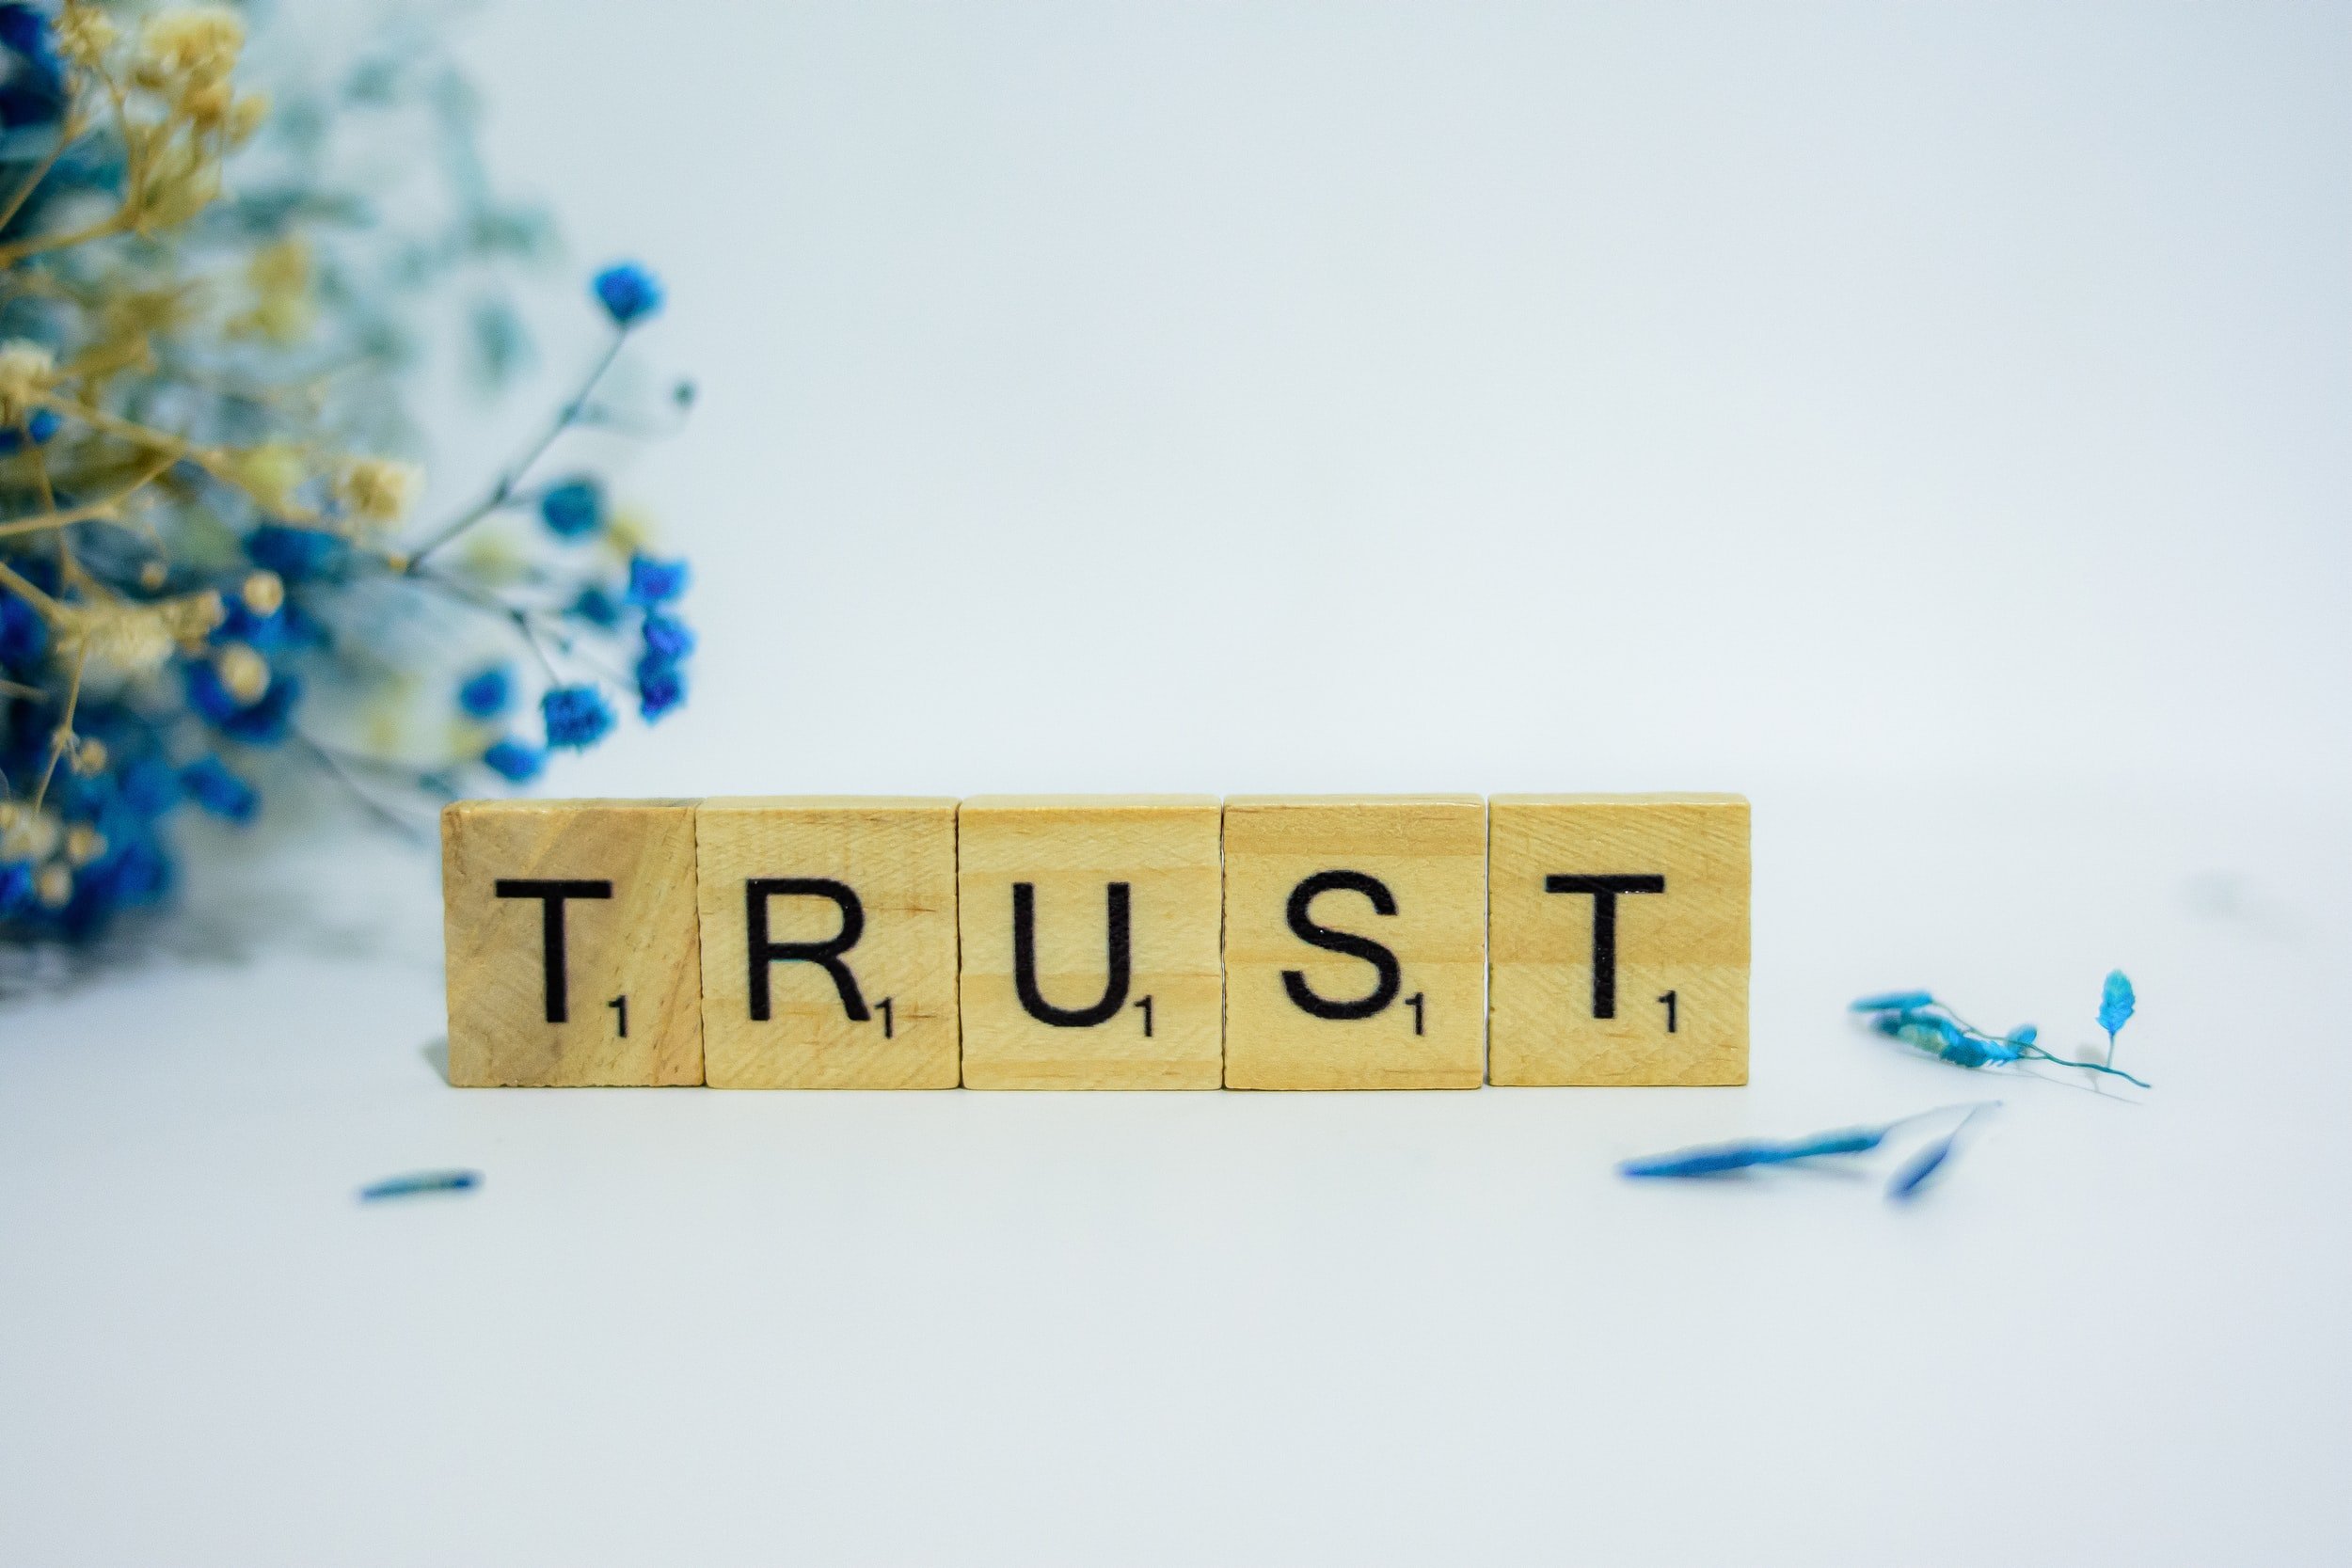 How Business Can Build and Maintain Trust